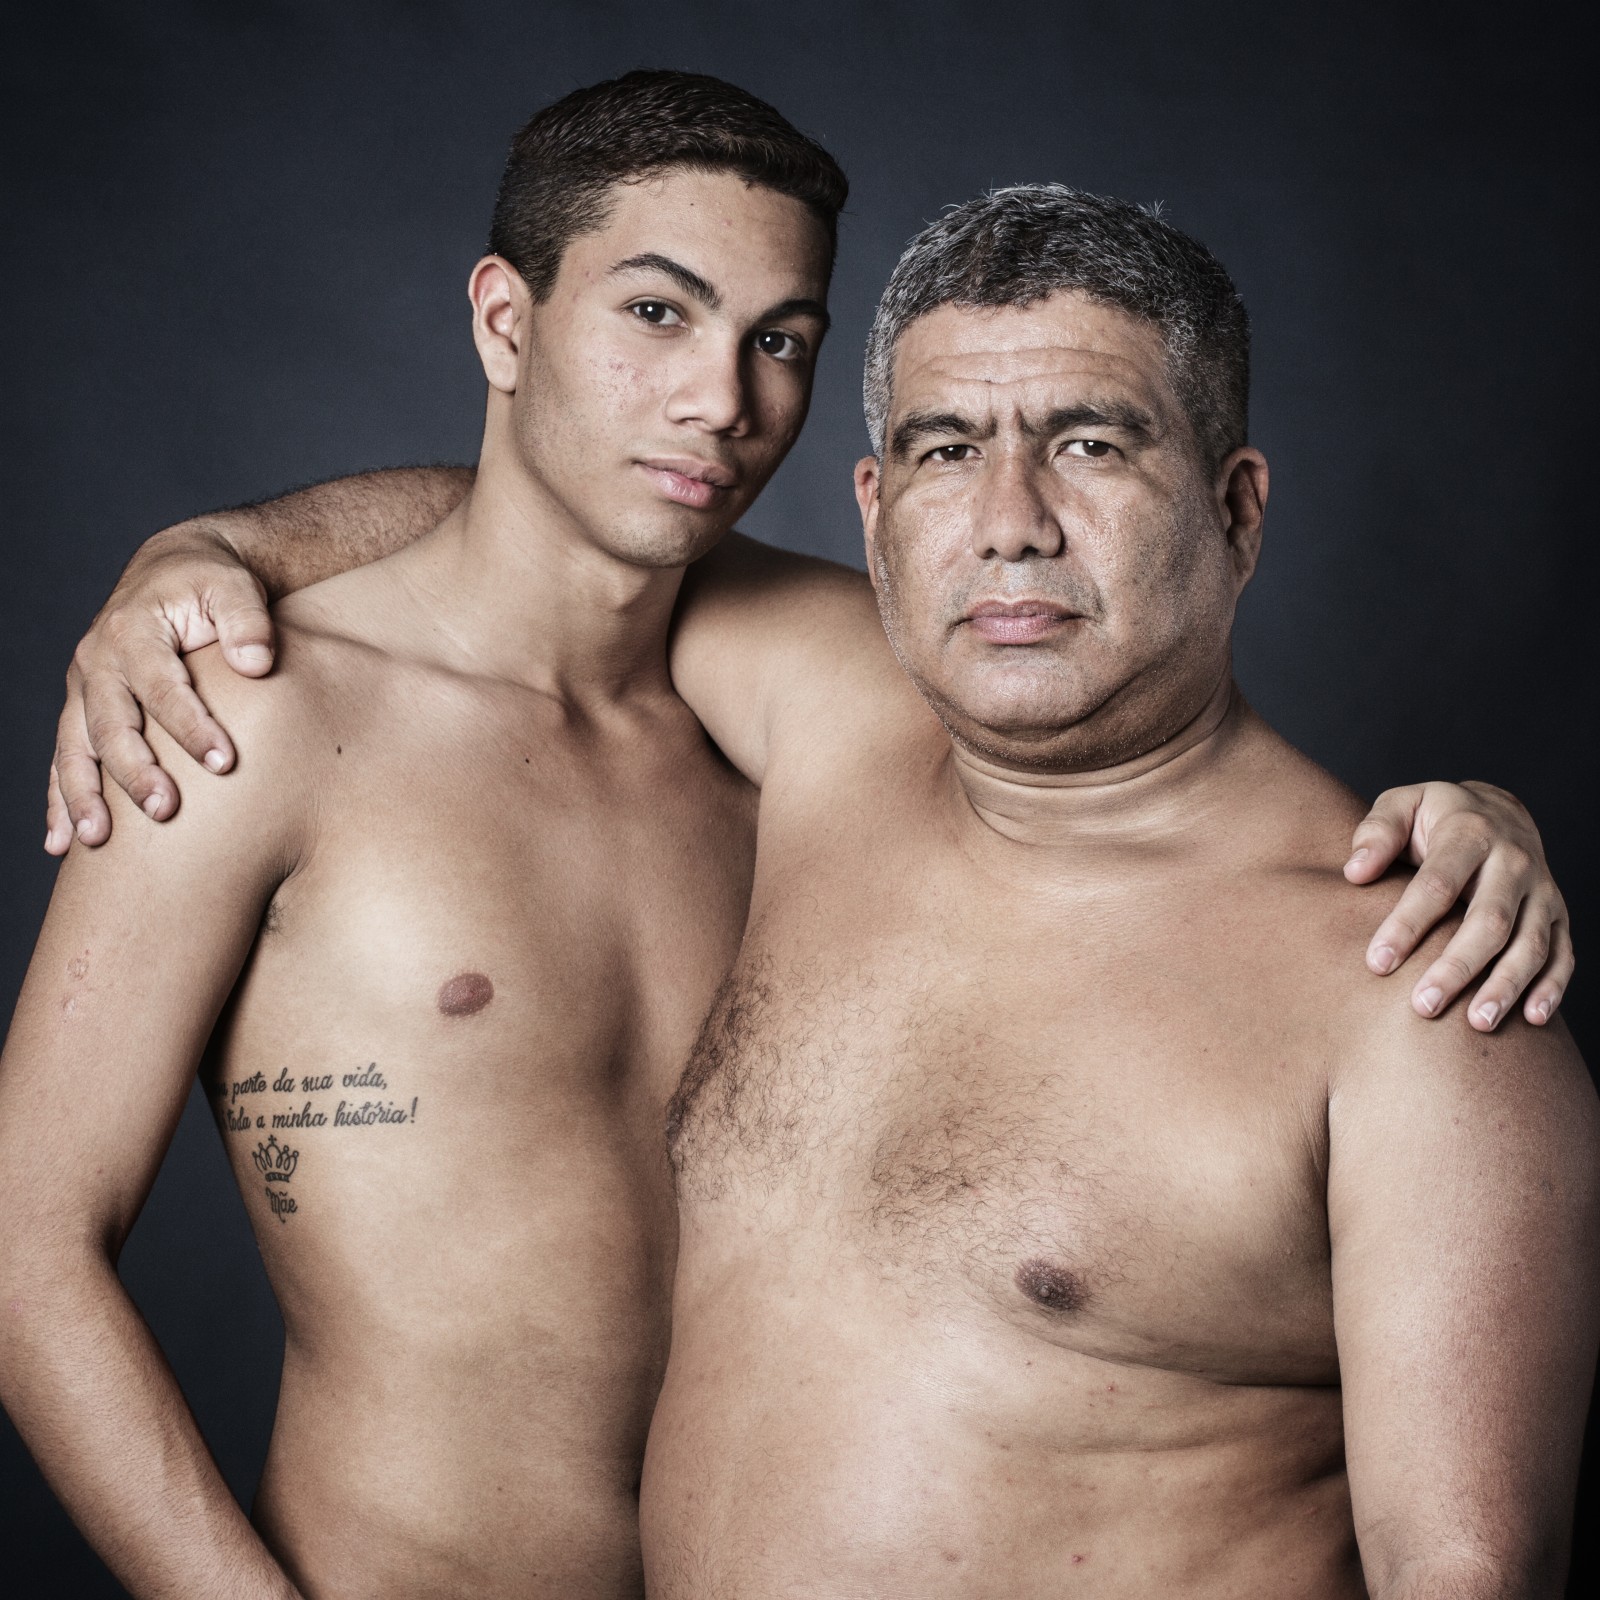 anita m wright recommends father and son nudity pic